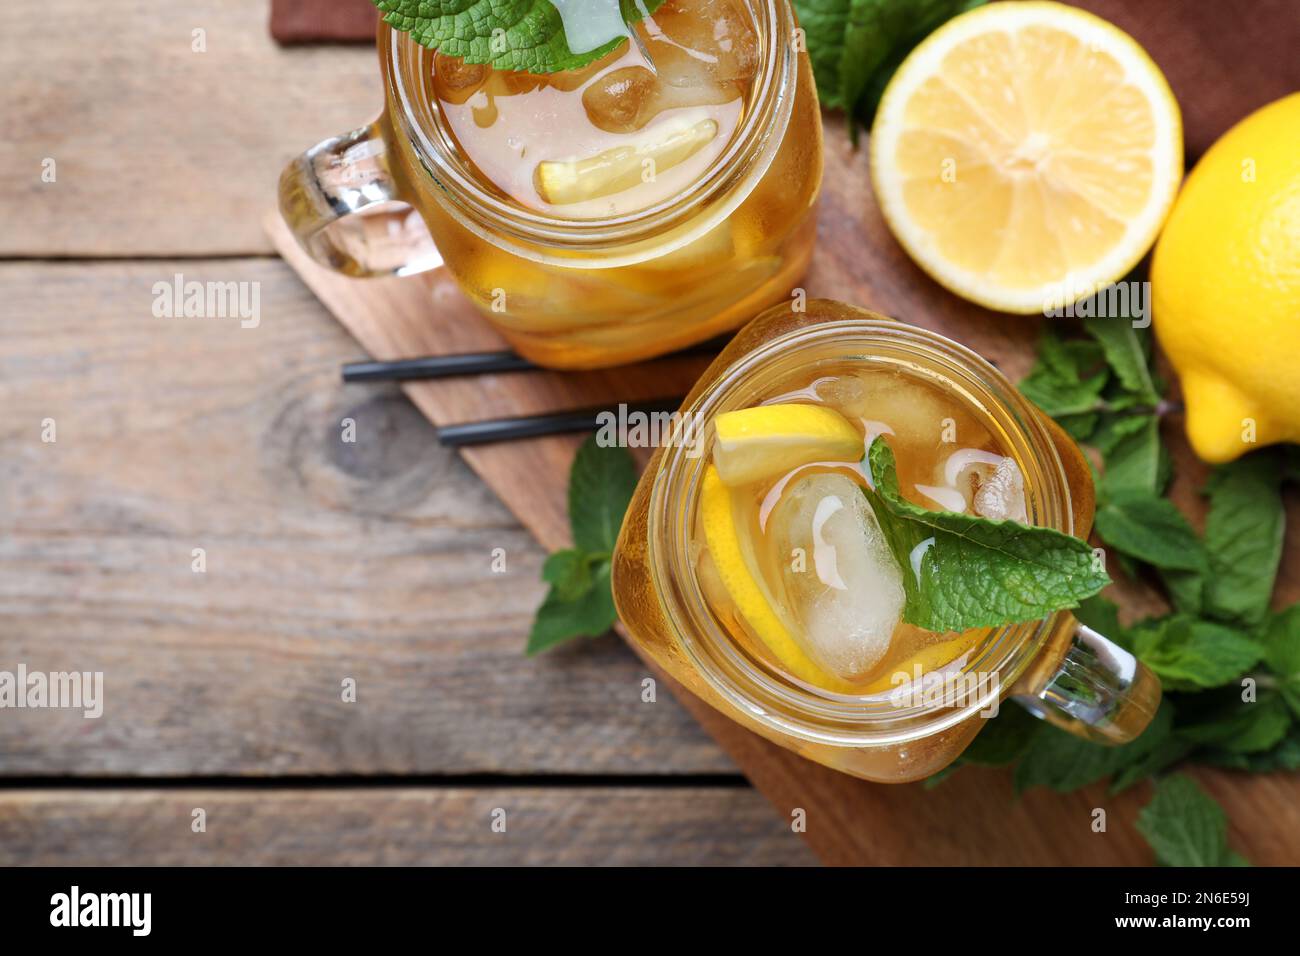 https://c8.alamy.com/comp/2N6E59J/delicious-iced-tea-on-wooden-table-flat-lay-space-for-text-2N6E59J.jpg